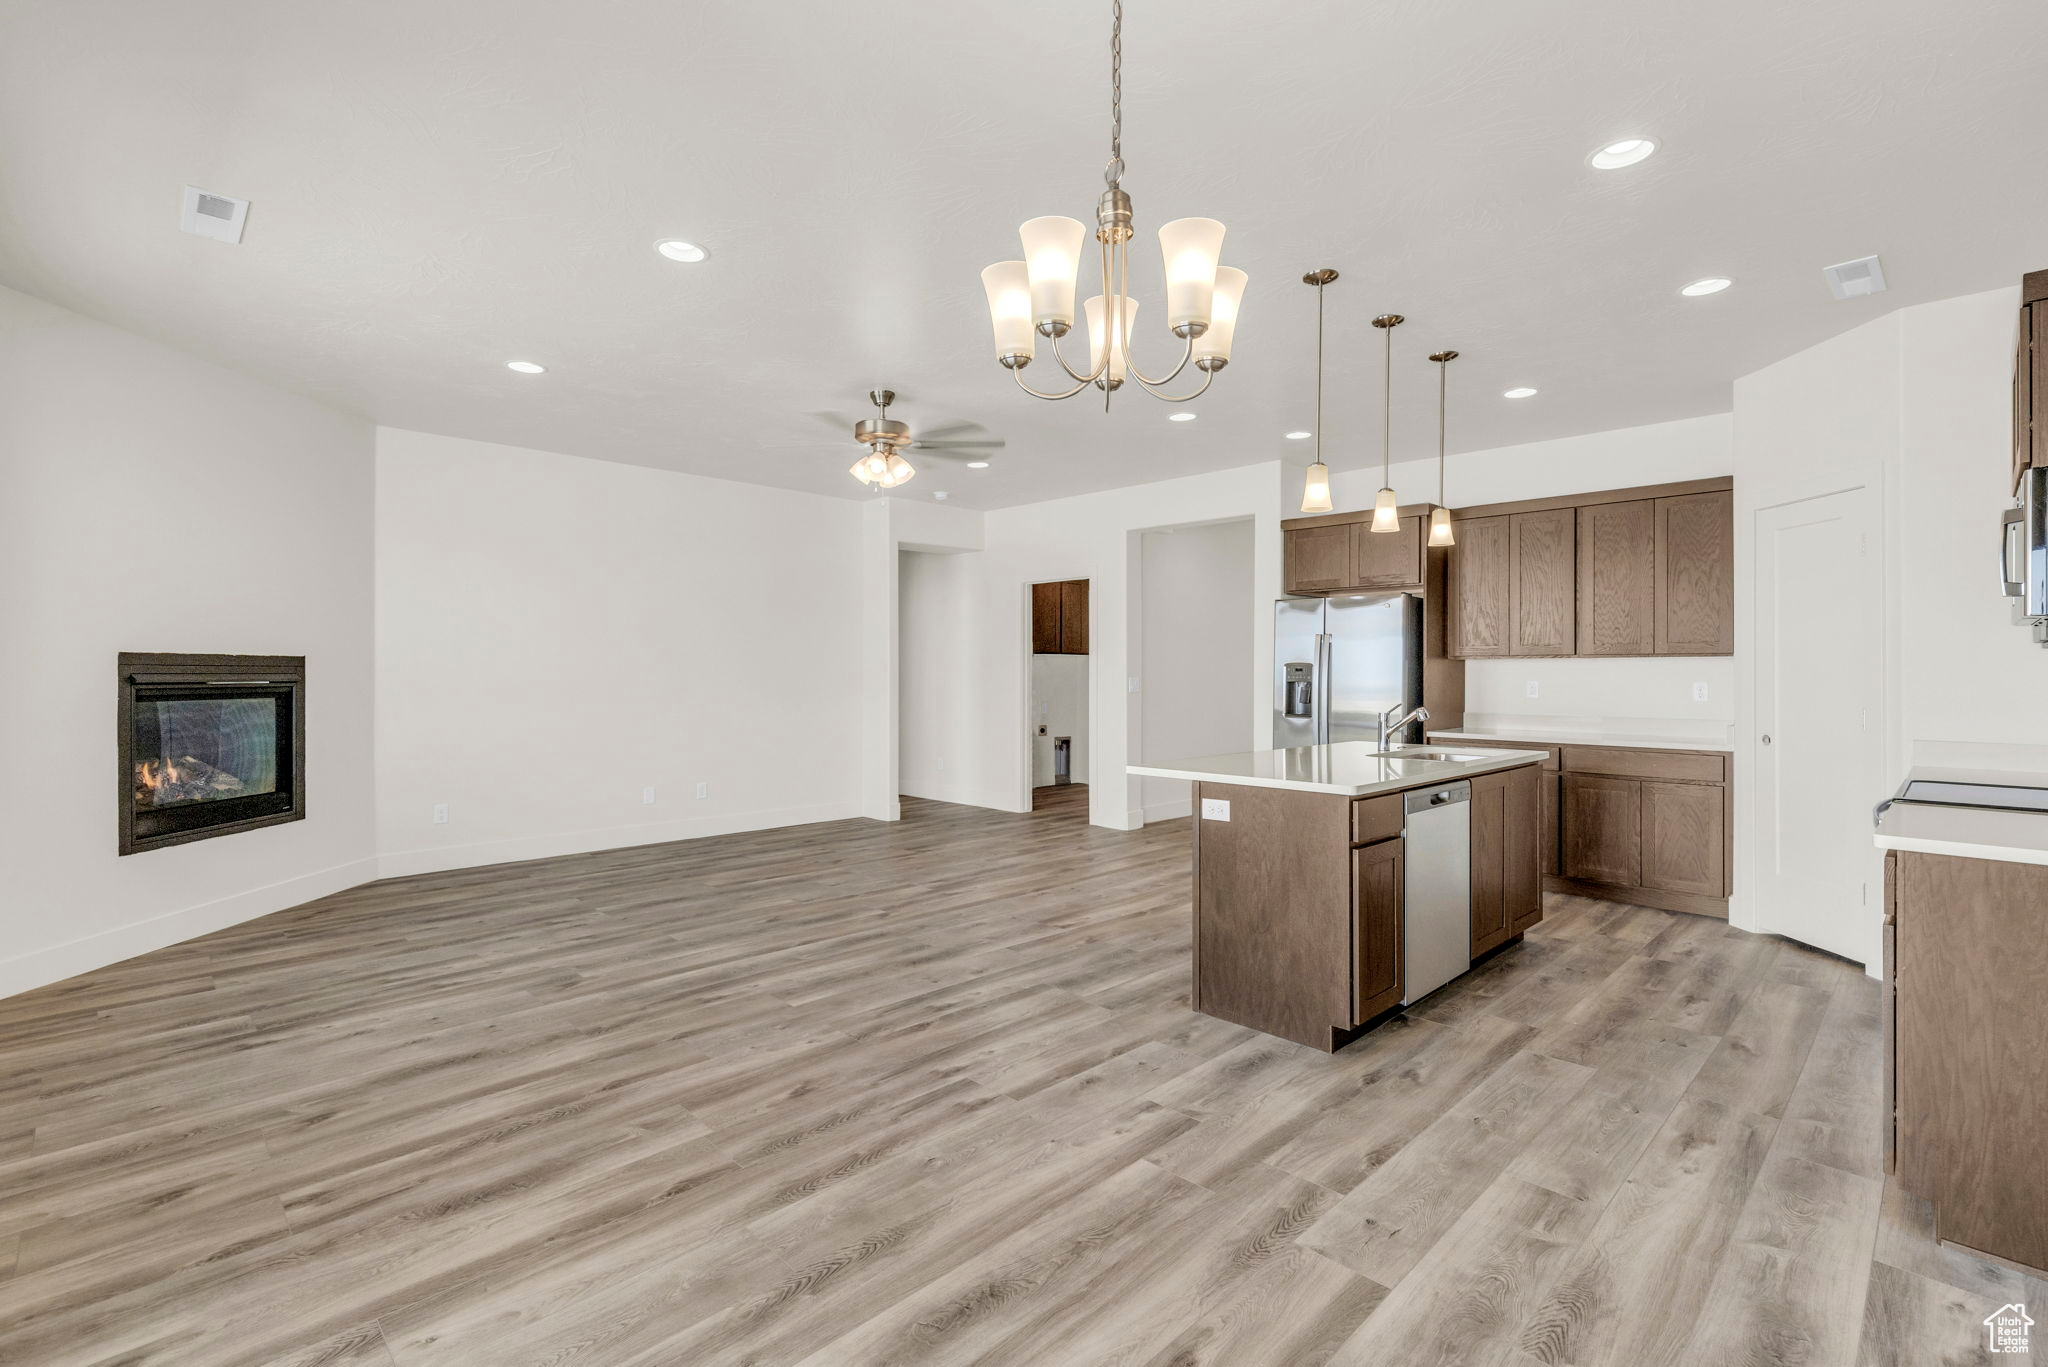 Kitchen featuring a center island with sink, light wood-type flooring, ceiling fan with notable chandelier, pendant lighting, and appliances with stainless steel finishes